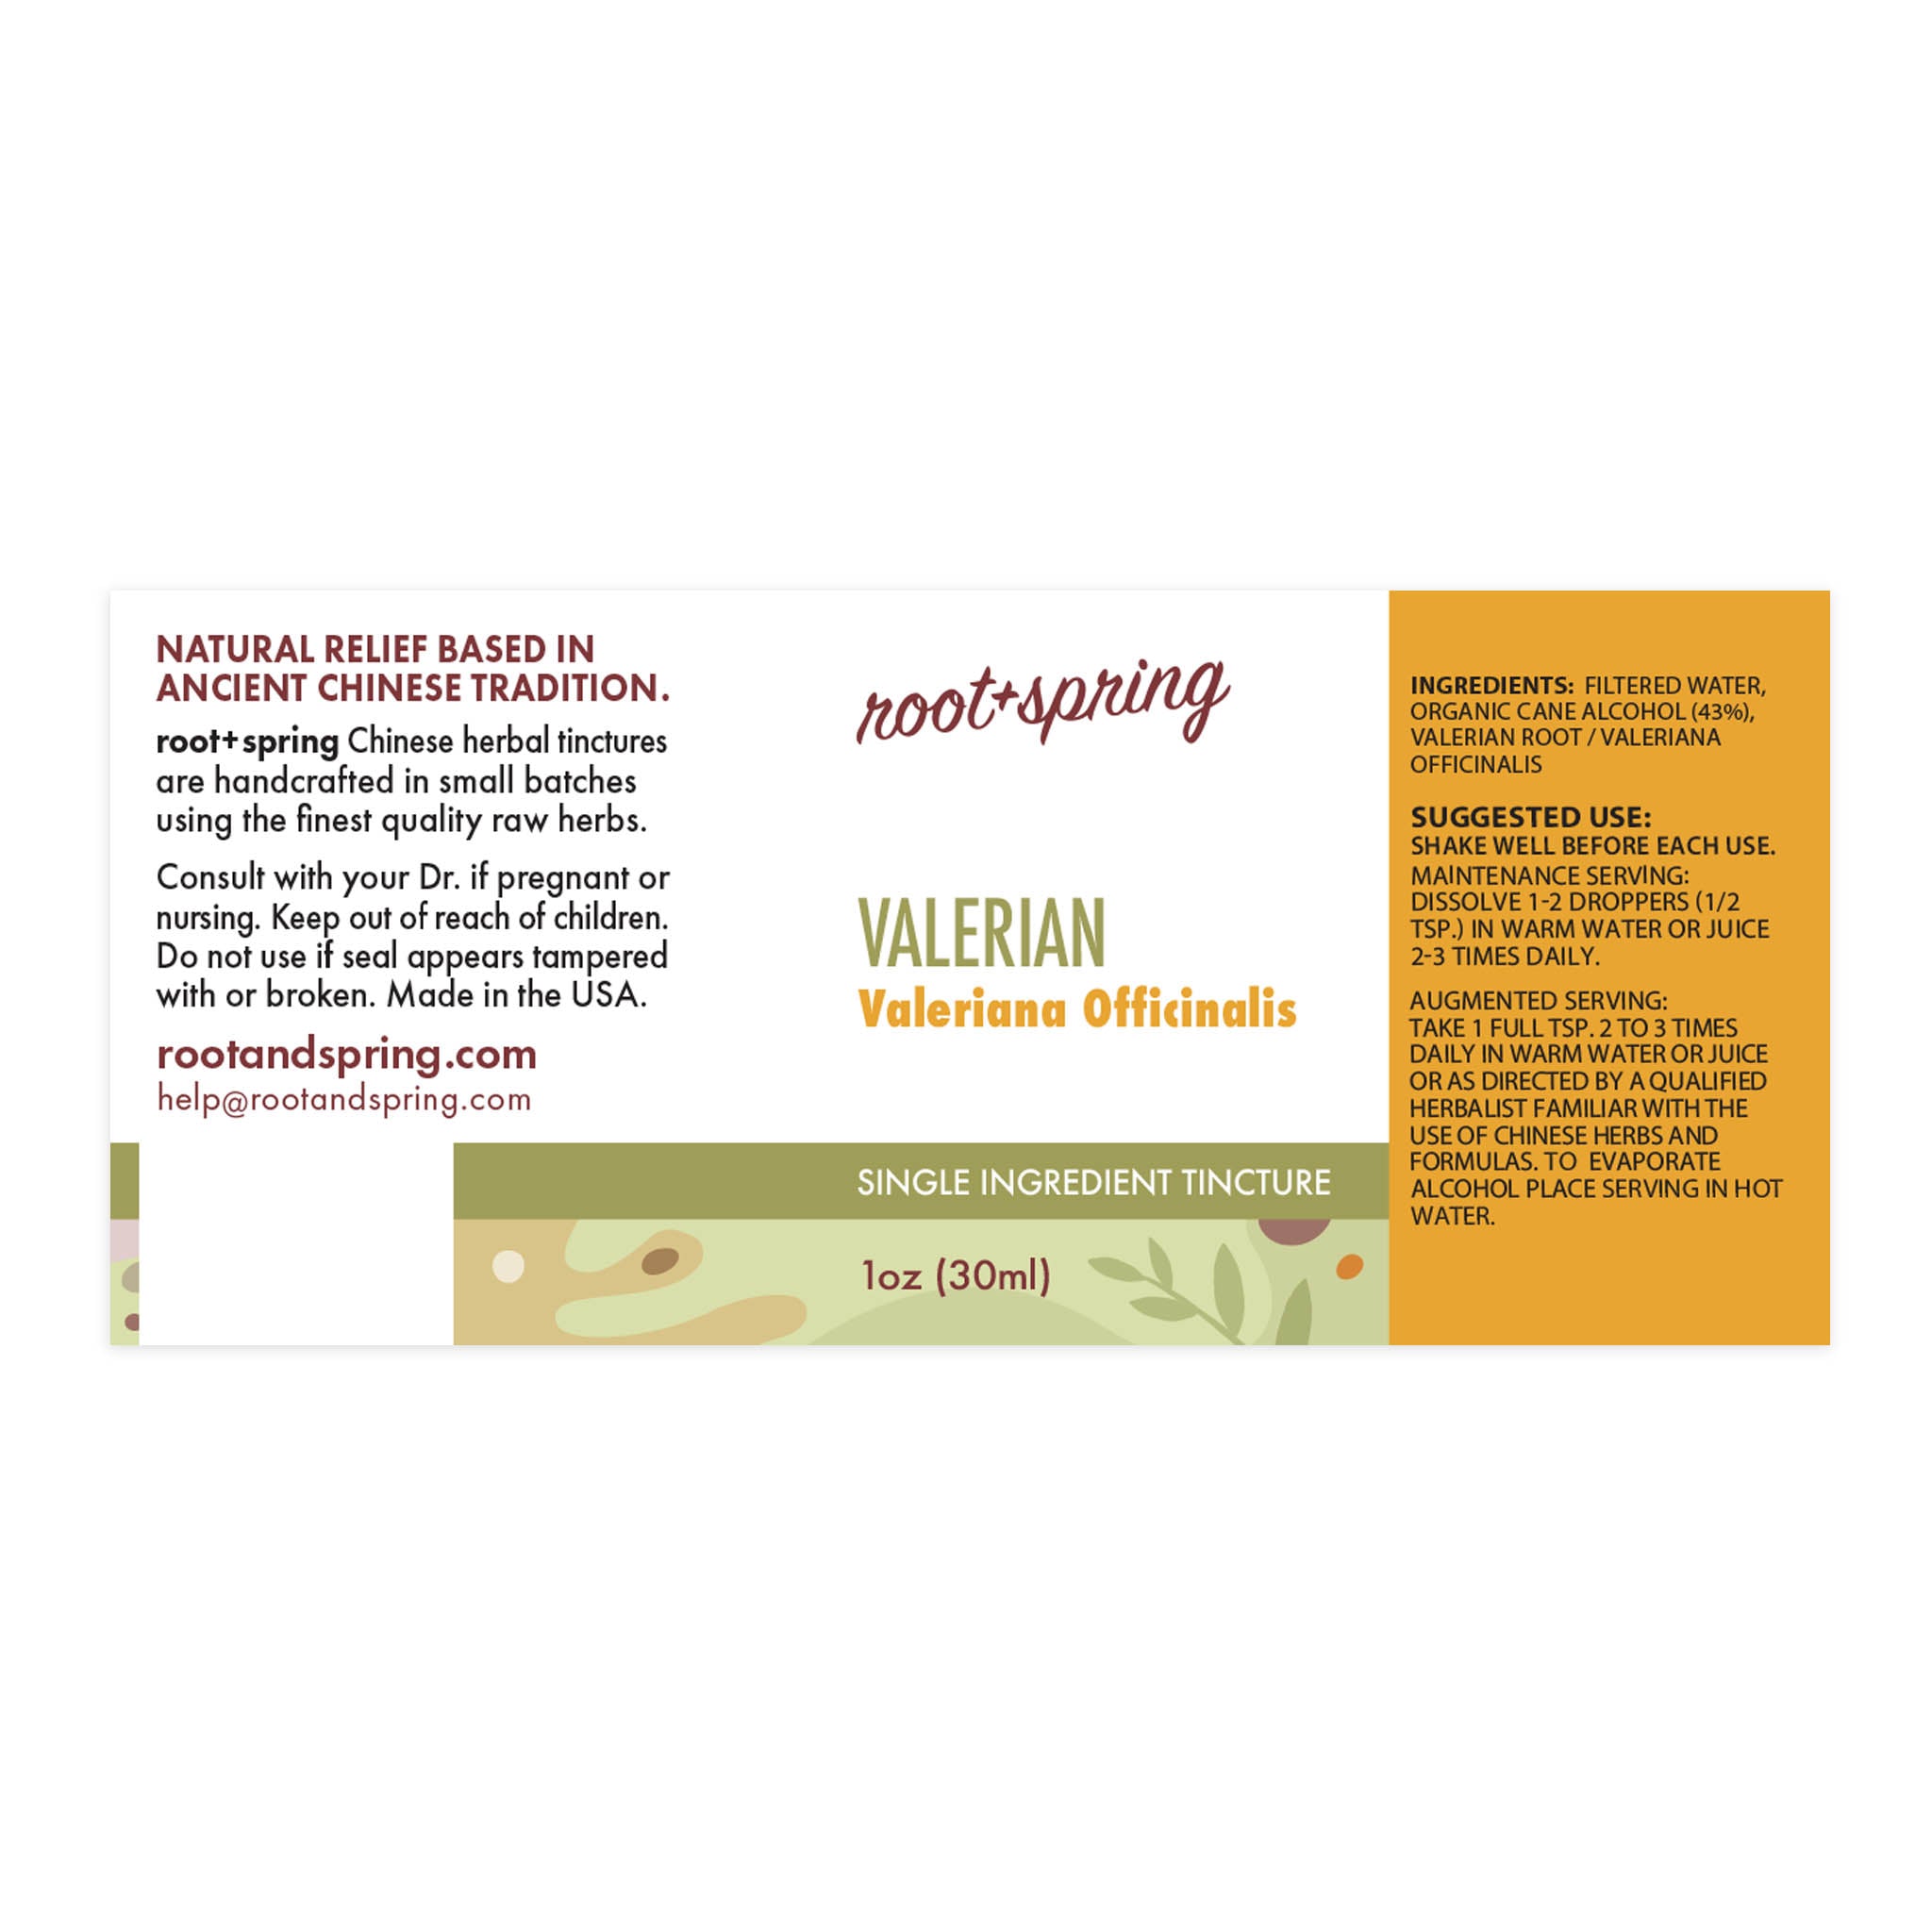 Label of Valerian (Valeriana Officinalis) - Herbal Tincture by root + spring